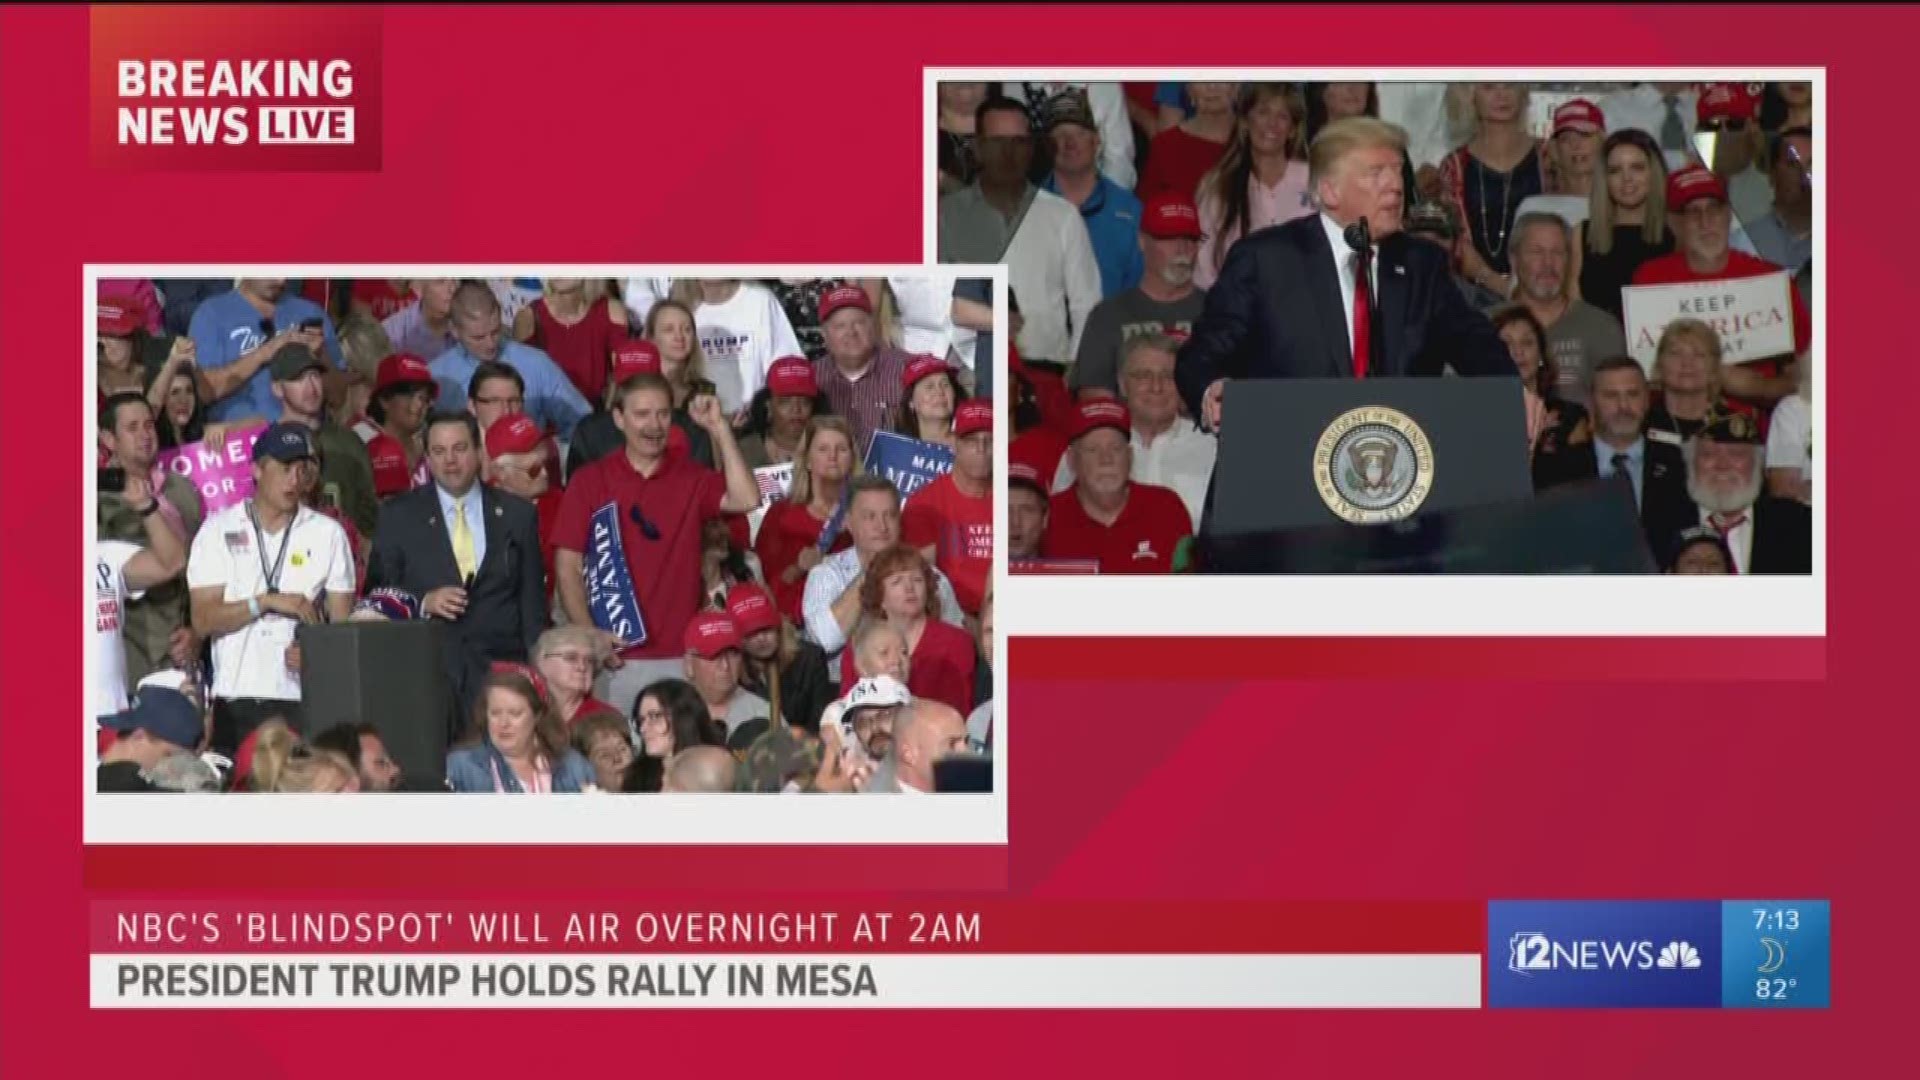 President Trump fired up a crowd in Mesa when he mention Hilary Clinton. The crowd booed and shouted "Lock her up!"